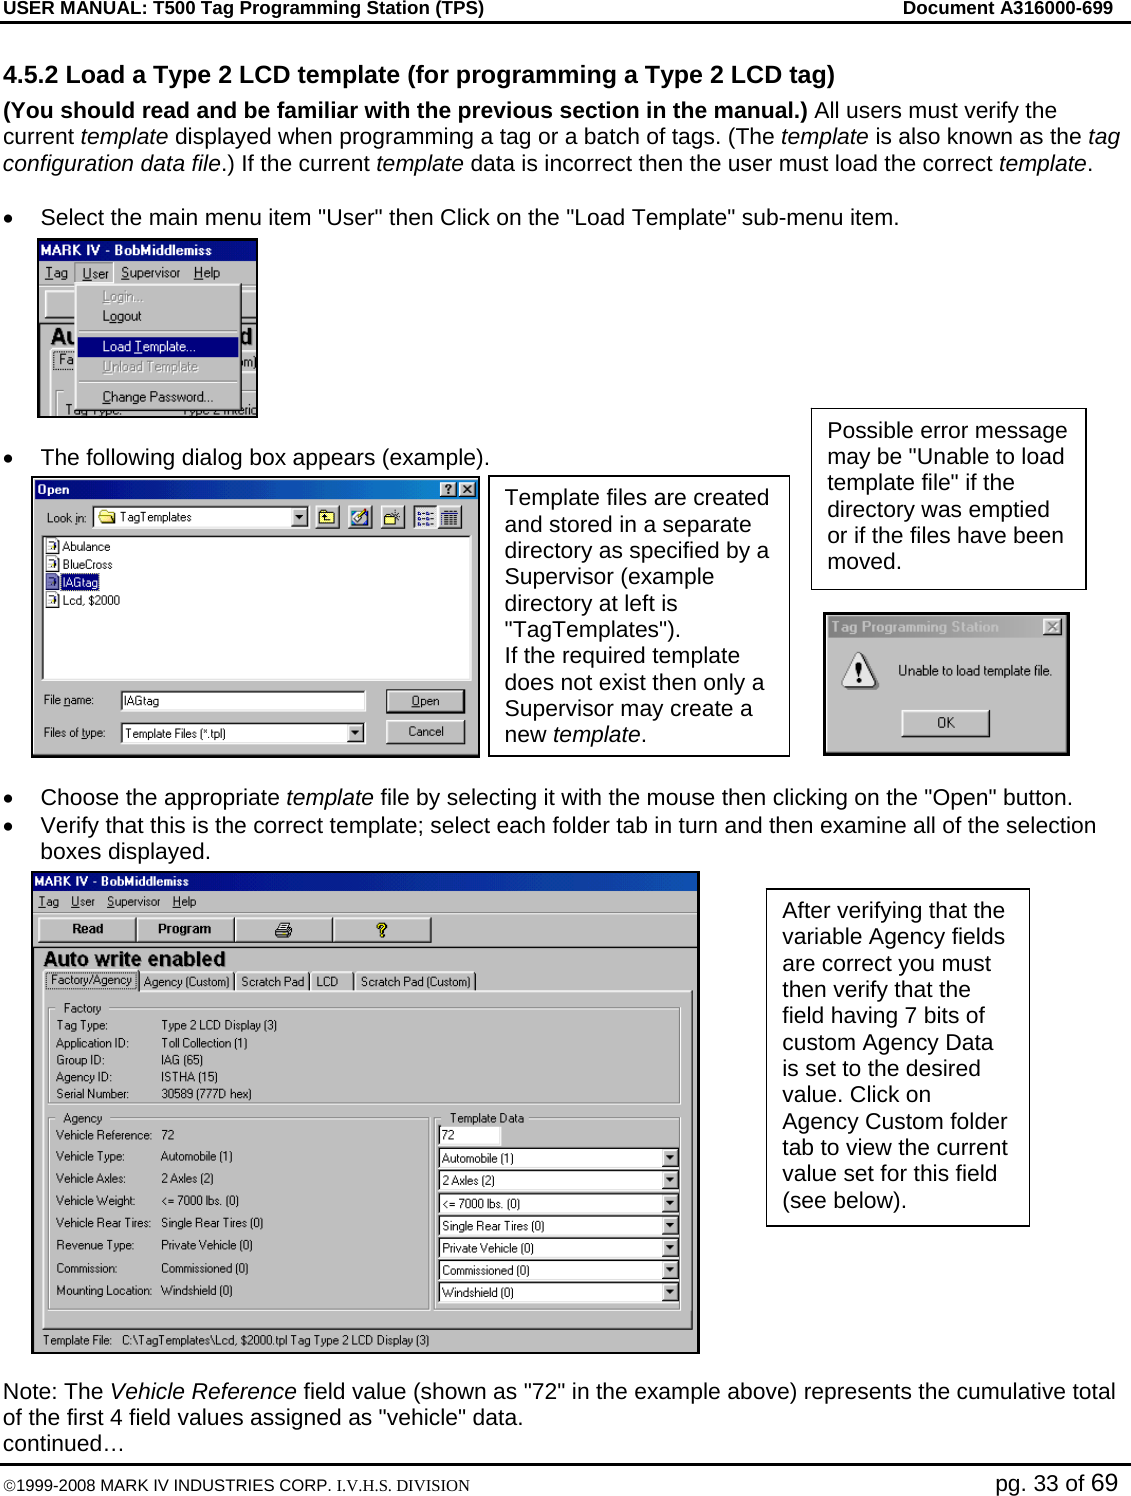 USER MANUAL: T500 Tag Programming Station (TPS)     Document A316000-699  ©1999-2008 MARK IV INDUSTRIES CORP. I.V.H.S. DIVISION   pg. 33 of 69 4.5.2 Load a Type 2 LCD template (for programming a Type 2 LCD tag) (You should read and be familiar with the previous section in the manual.) All users must verify the current template displayed when programming a tag or a batch of tags. (The template is also known as the tag configuration data file.) If the current template data is incorrect then the user must load the correct template.   •  Select the main menu item &quot;User&quot; then Click on the &quot;Load Template&quot; sub-menu item.  •  The following dialog box appears (example).  •  Choose the appropriate template file by selecting it with the mouse then clicking on the &quot;Open&quot; button.  •  Verify that this is the correct template; select each folder tab in turn and then examine all of the selection boxes displayed.   Note: The Vehicle Reference field value (shown as &quot;72&quot; in the example above) represents the cumulative total of the first 4 field values assigned as &quot;vehicle&quot; data. continued… Template files are created and stored in a separate directory as specified by a Supervisor (example directory at left is &quot;TagTemplates&quot;). If the required template does not exist then only a Supervisor may create a new template. Possible error message may be &quot;Unable to load template file&quot; if the directory was emptied or if the files have been moved. After verifying that the variable Agency fields are correct you must then verify that the field having 7 bits of custom Agency Data is set to the desired value. Click on Agency Custom folder tab to view the current value set for this field (see below). 